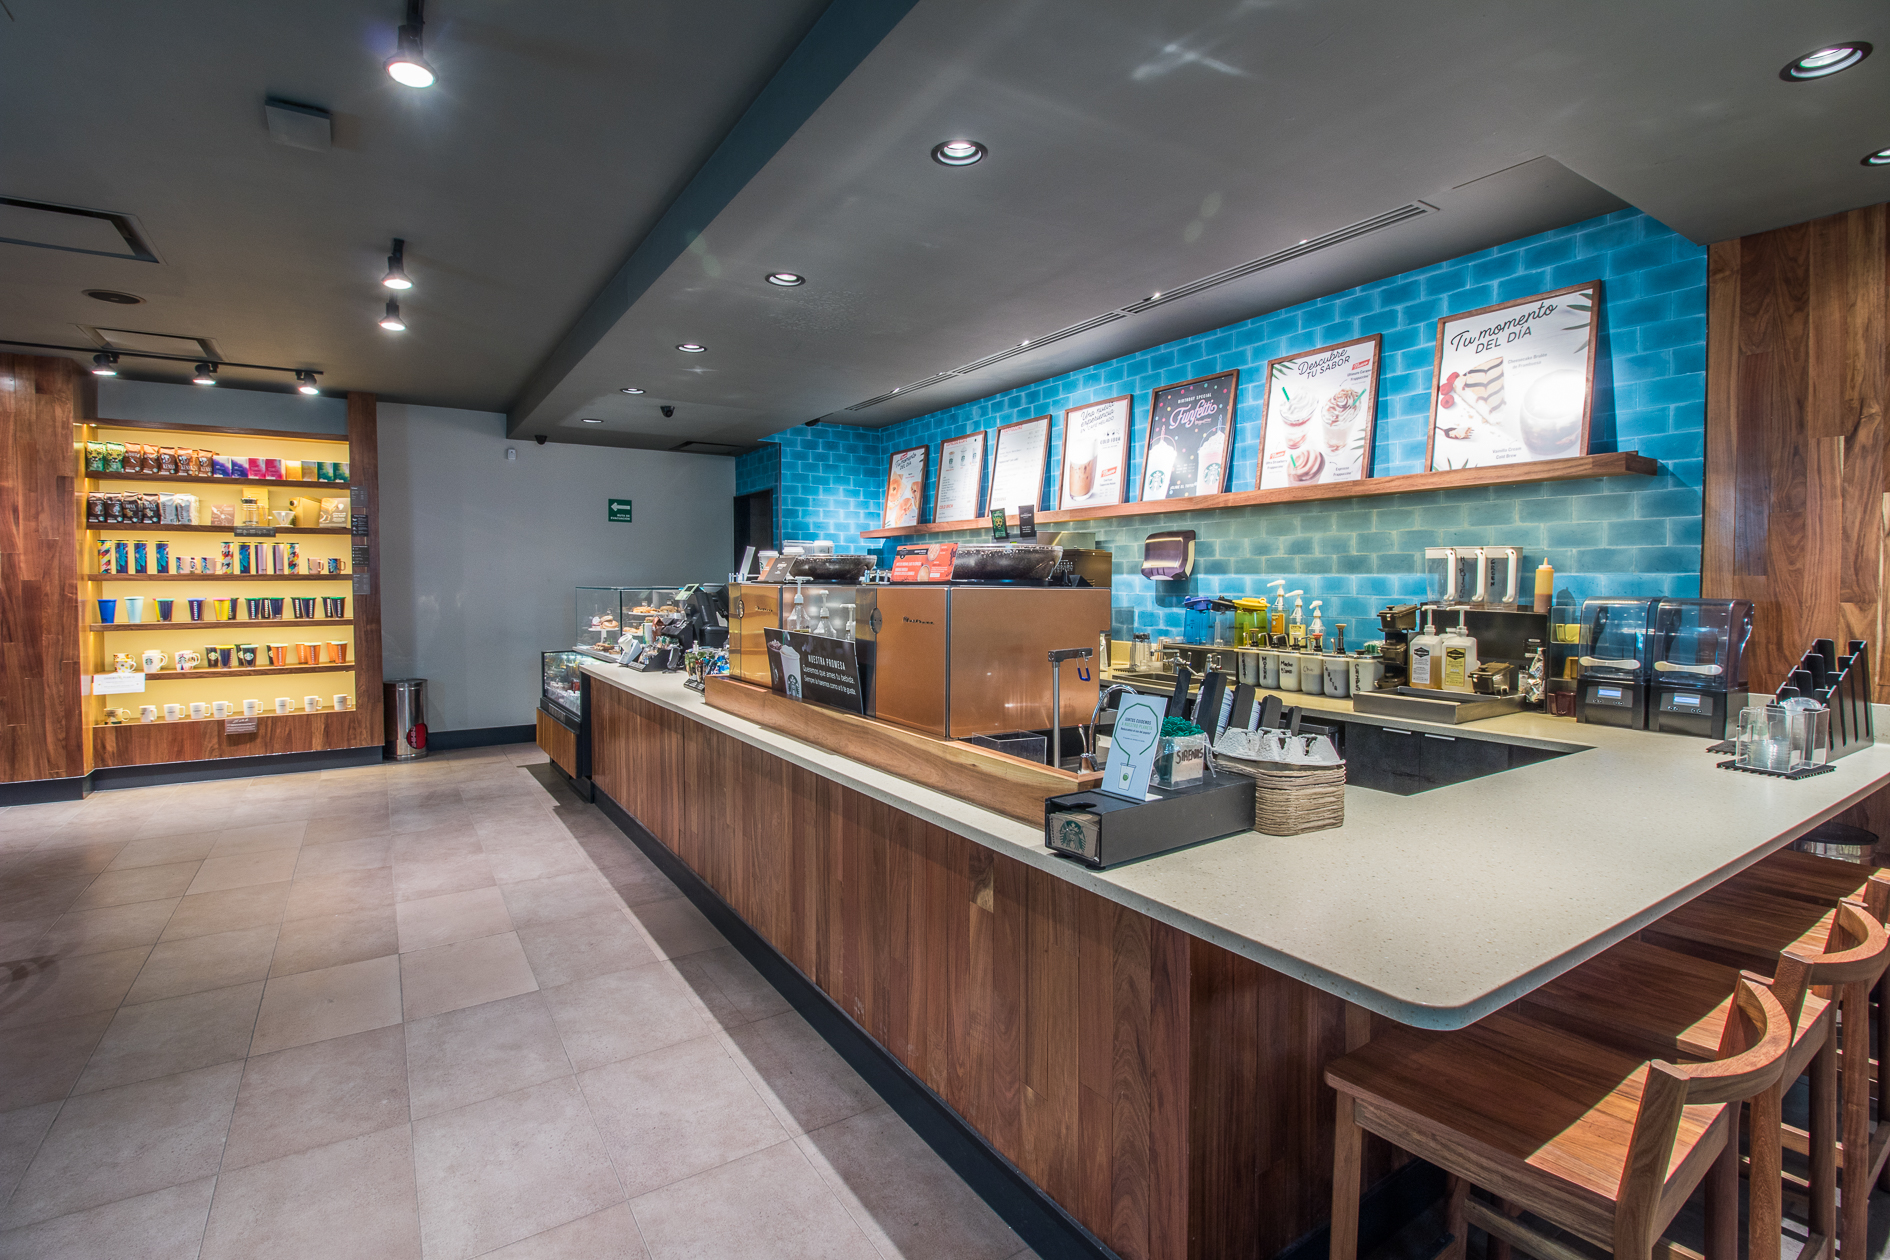 Starbucks front service counter and merchandise available for purchase